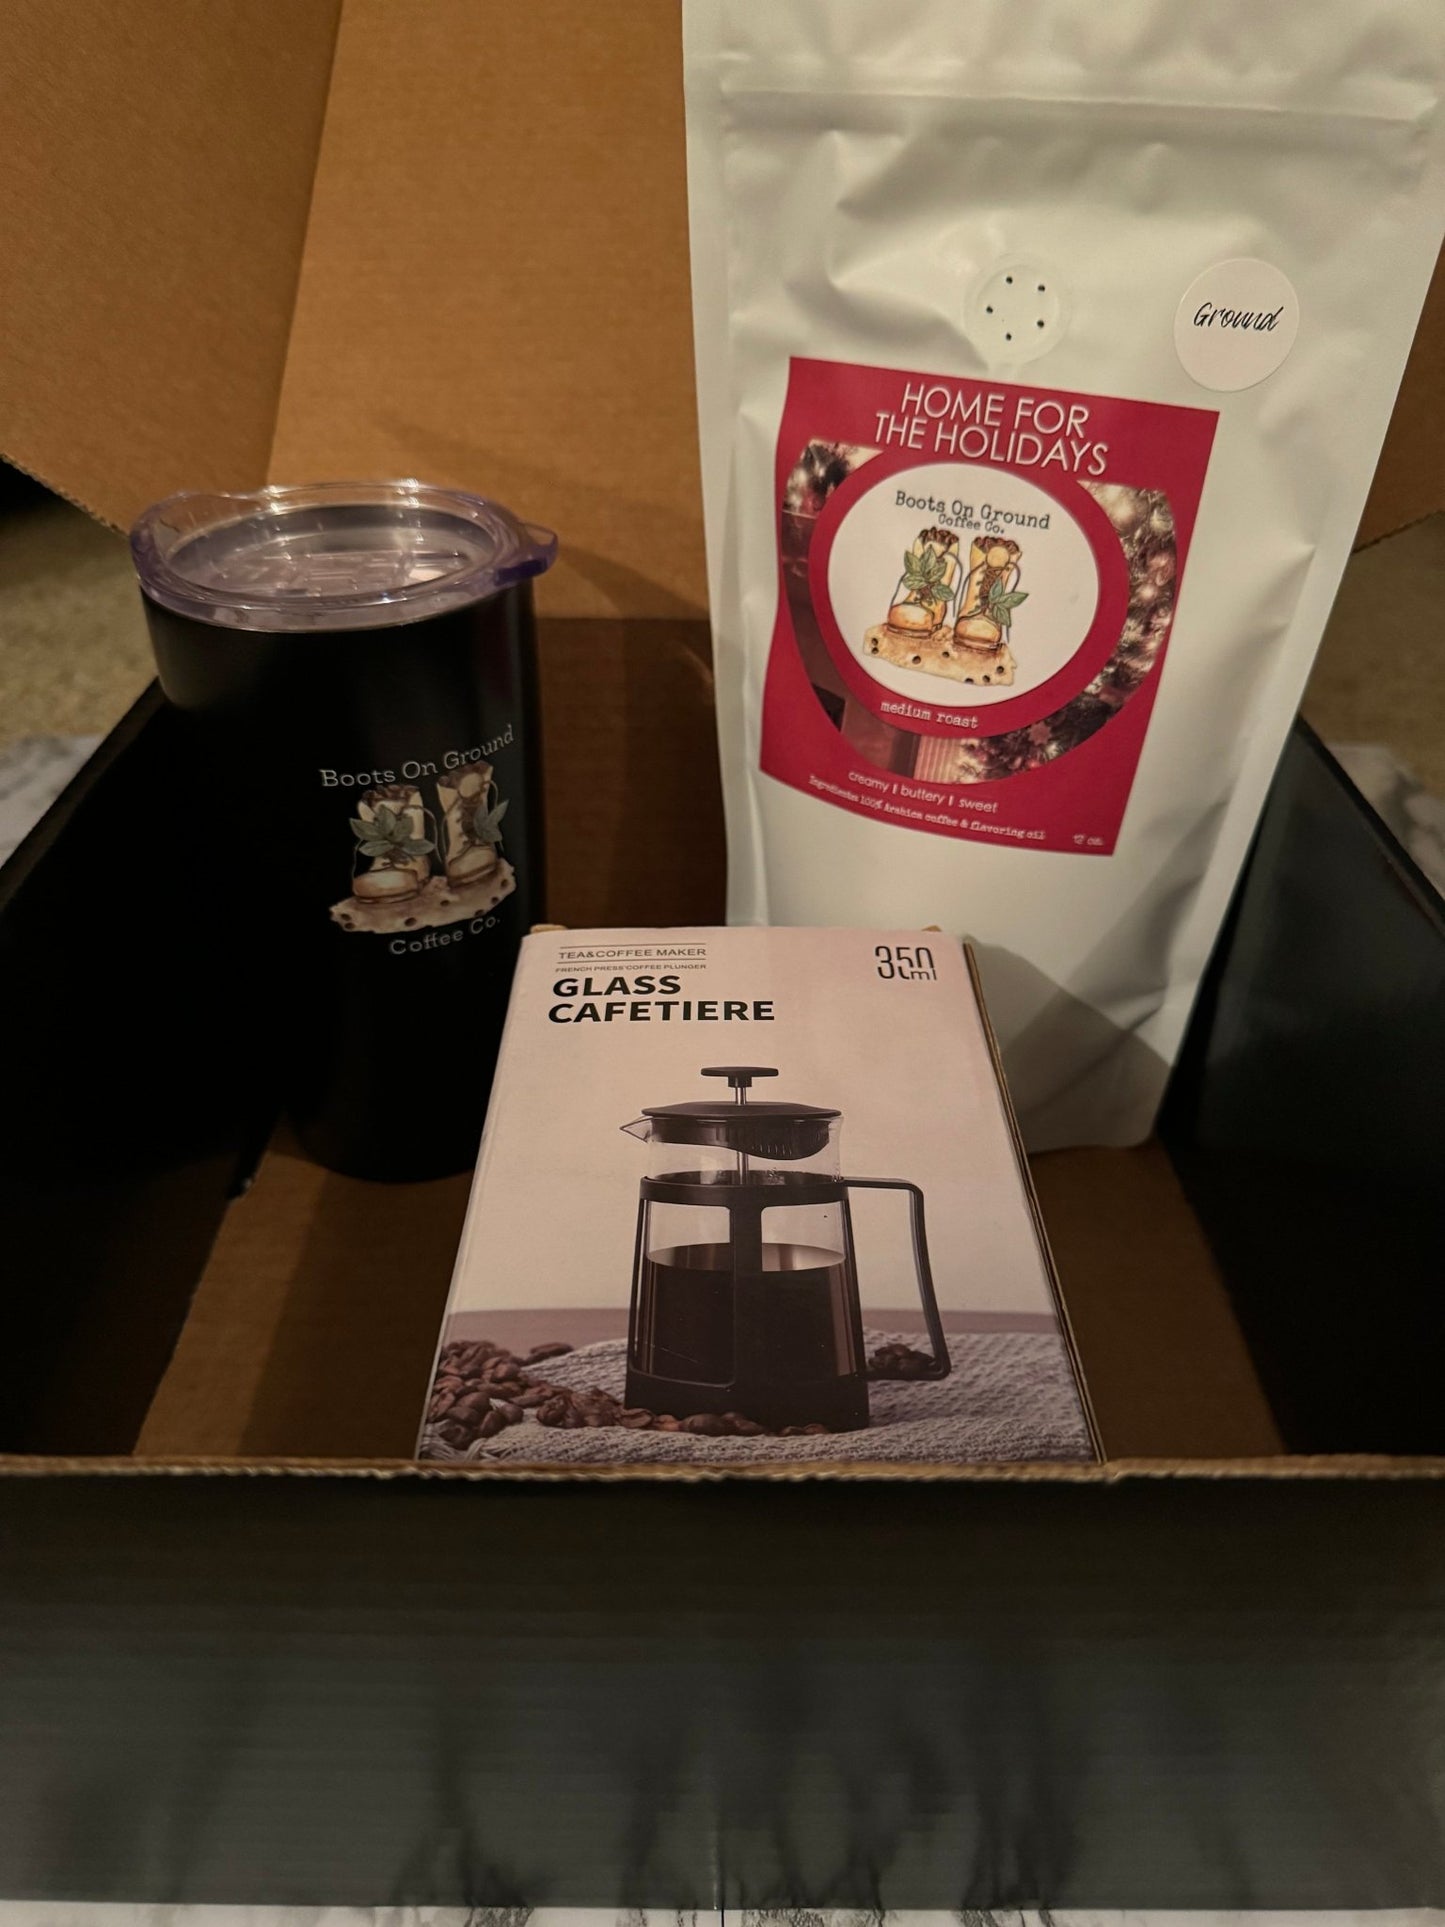 Deployment Crate - Boots on ground coffee co